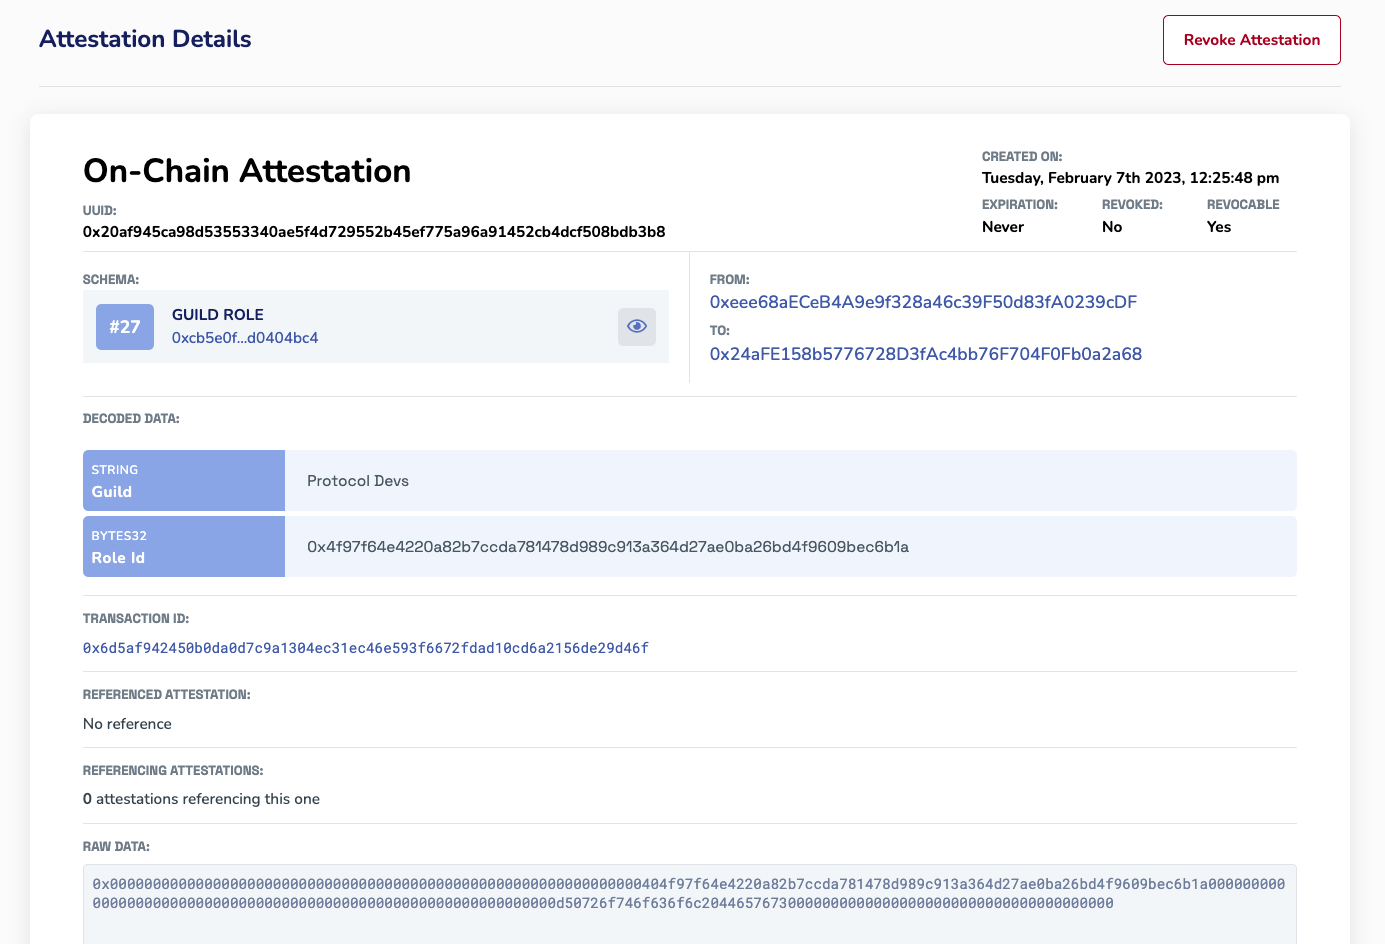 Sample DAO attesting to a guild member's role using on-chain attestations on Ethereum Attestation Service (EAS).